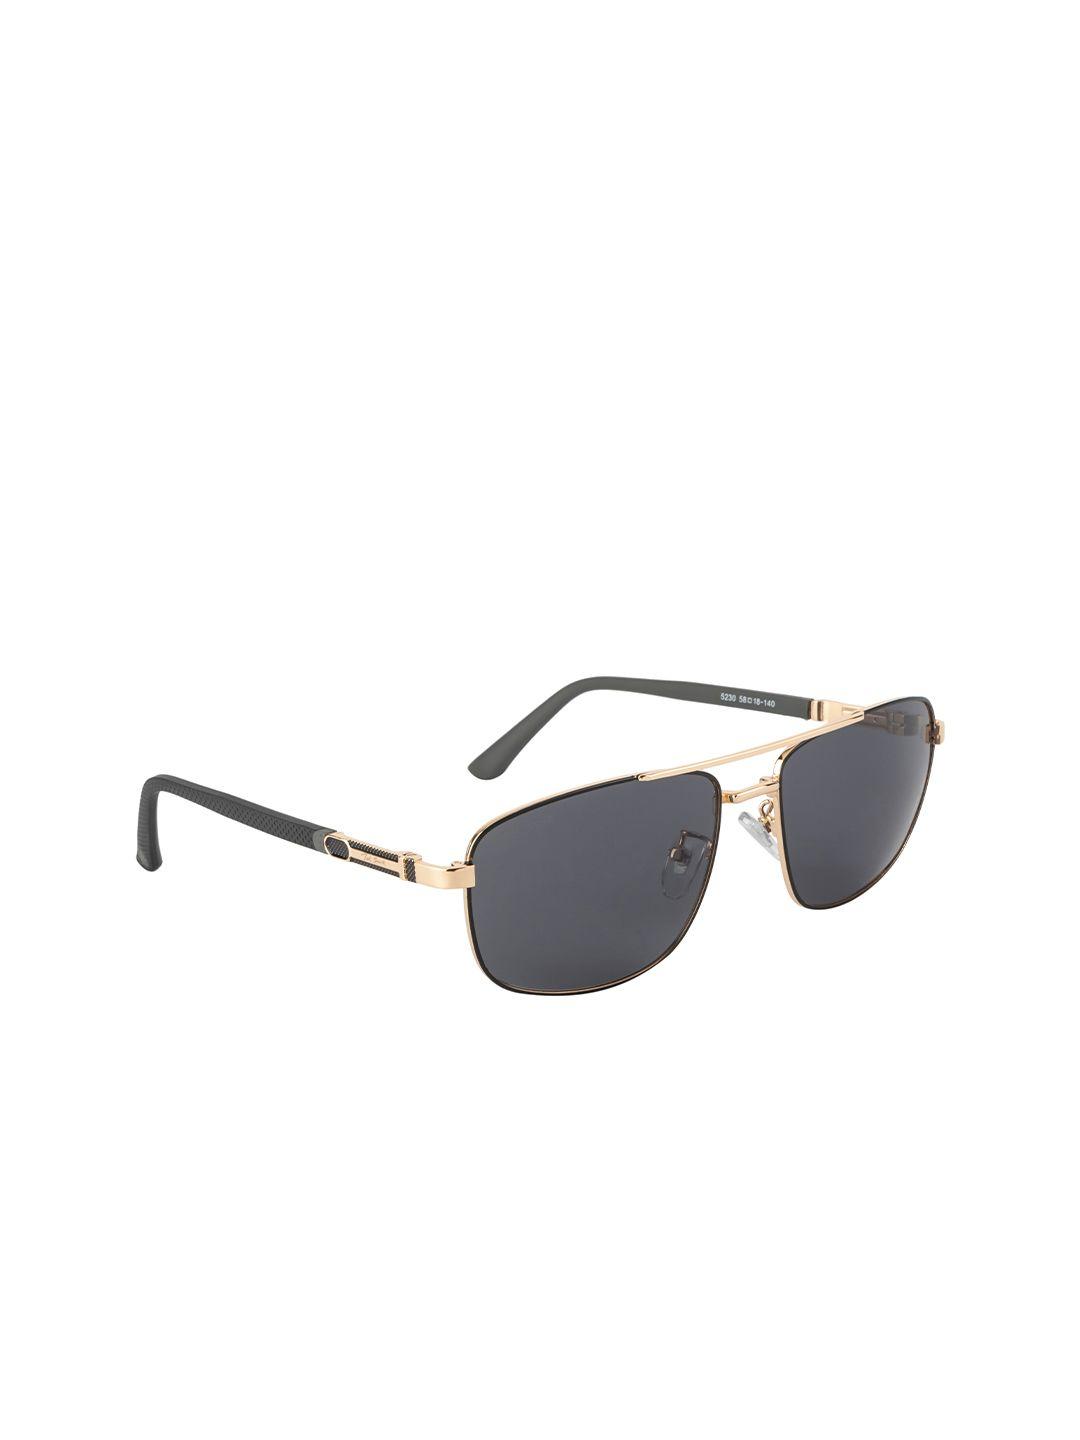 ted smith unisex grey lens & gold-toned aviator sunglasses with uv protected lens